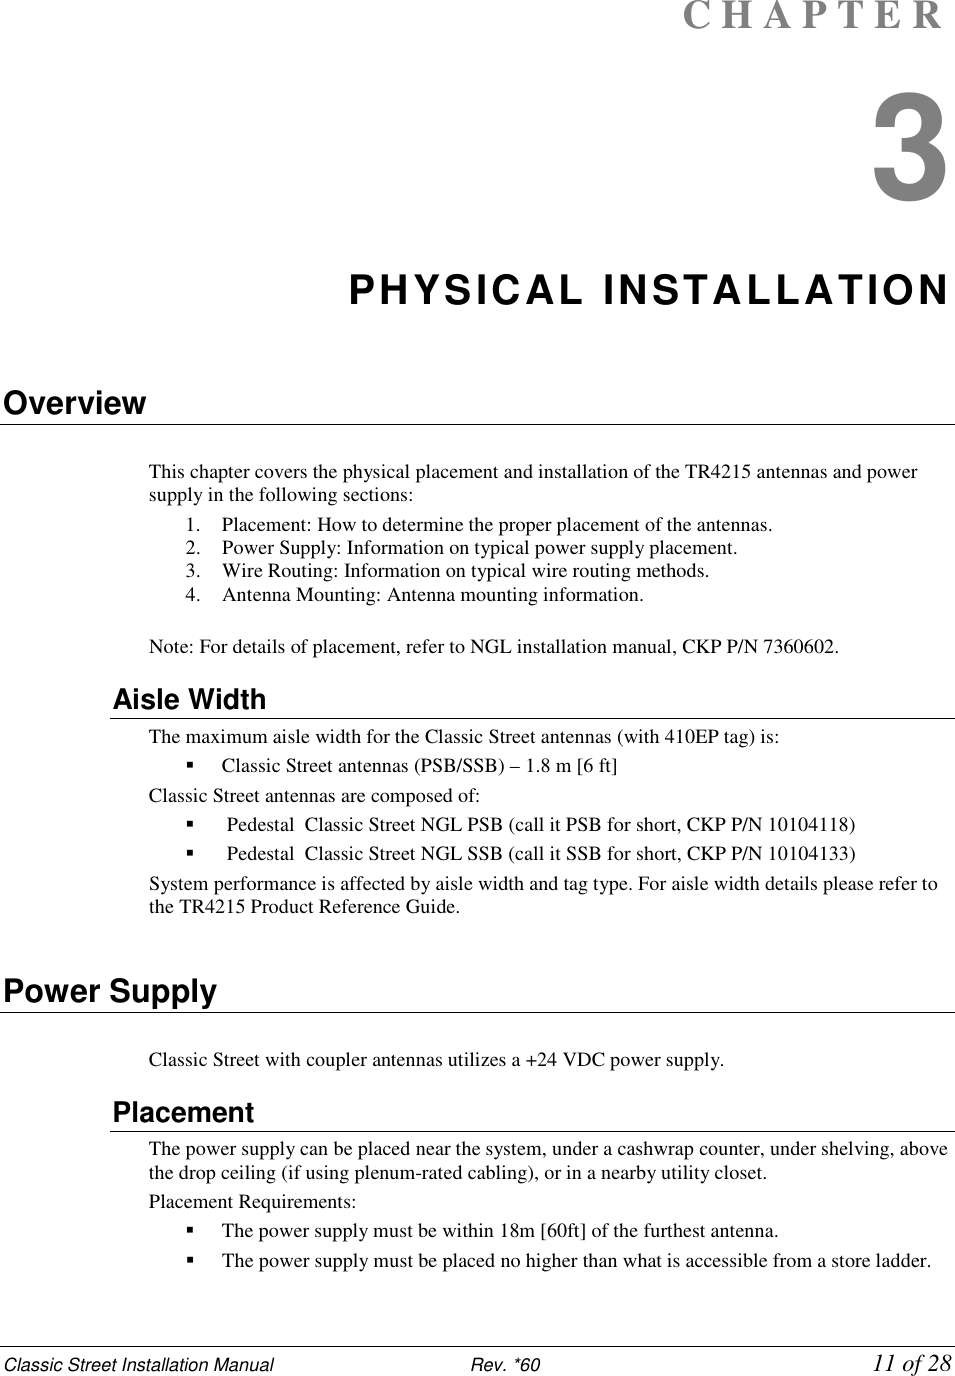 Classic Street Installation Manual                           Rev. *60             11 of 28 C H A P T E R  3 PHYSICAL INSTALLATION  Overview  This chapter covers the physical placement and installation of the TR4215 antennas and power supply in the following sections:  1. Placement: How to determine the proper placement of the antennas.  2. Power Supply: Information on typical power supply placement.  3. Wire Routing: Information on typical wire routing methods.  4. Antenna Mounting: Antenna mounting information.  Note: For details of placement, refer to NGL installation manual, CKP P/N 7360602. Aisle Width The maximum aisle width for the Classic Street antennas (with 410EP tag) is:   Classic Street antennas (PSB/SSB) – 1.8 m [6 ft] Classic Street antennas are composed of:   Pedestal  Classic Street NGL PSB (call it PSB for short, CKP P/N 10104118)   Pedestal  Classic Street NGL SSB (call it SSB for short, CKP P/N 10104133) System performance is affected by aisle width and tag type. For aisle width details please refer to the TR4215 Product Reference Guide.  Power Supply  Classic Street with coupler antennas utilizes a +24 VDC power supply. Placement The power supply can be placed near the system, under a cashwrap counter, under shelving, above the drop ceiling (if using plenum-rated cabling), or in a nearby utility closet. Placement Requirements:   The power supply must be within 18m [60ft] of the furthest antenna.   The power supply must be placed no higher than what is accessible from a store ladder. 